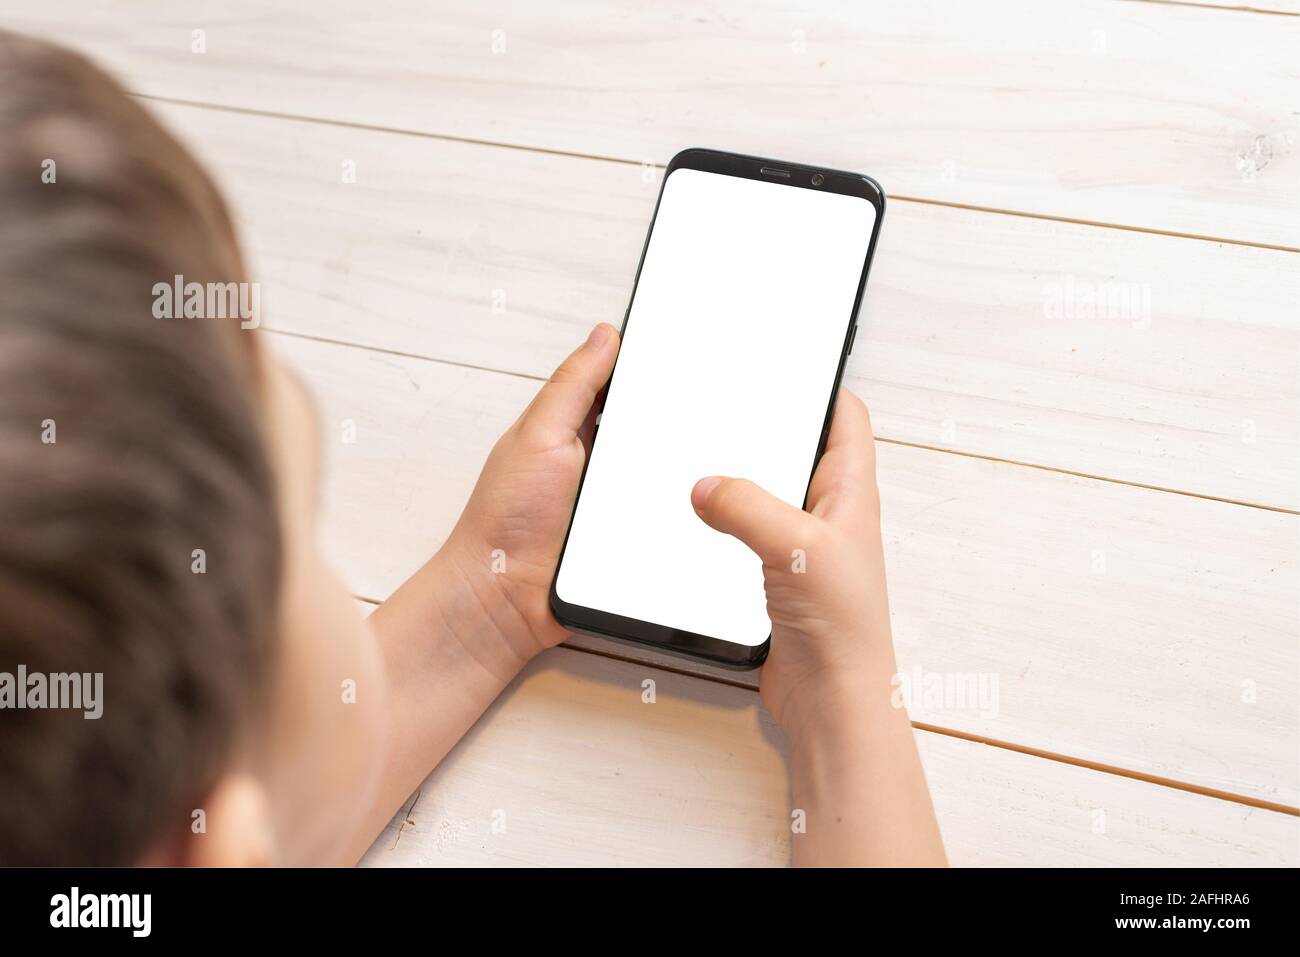 Kid holding smart phone and touch isolated display for app, or game promotion. White wooden desk in background. Modern smart phone with round edges Stock Photo